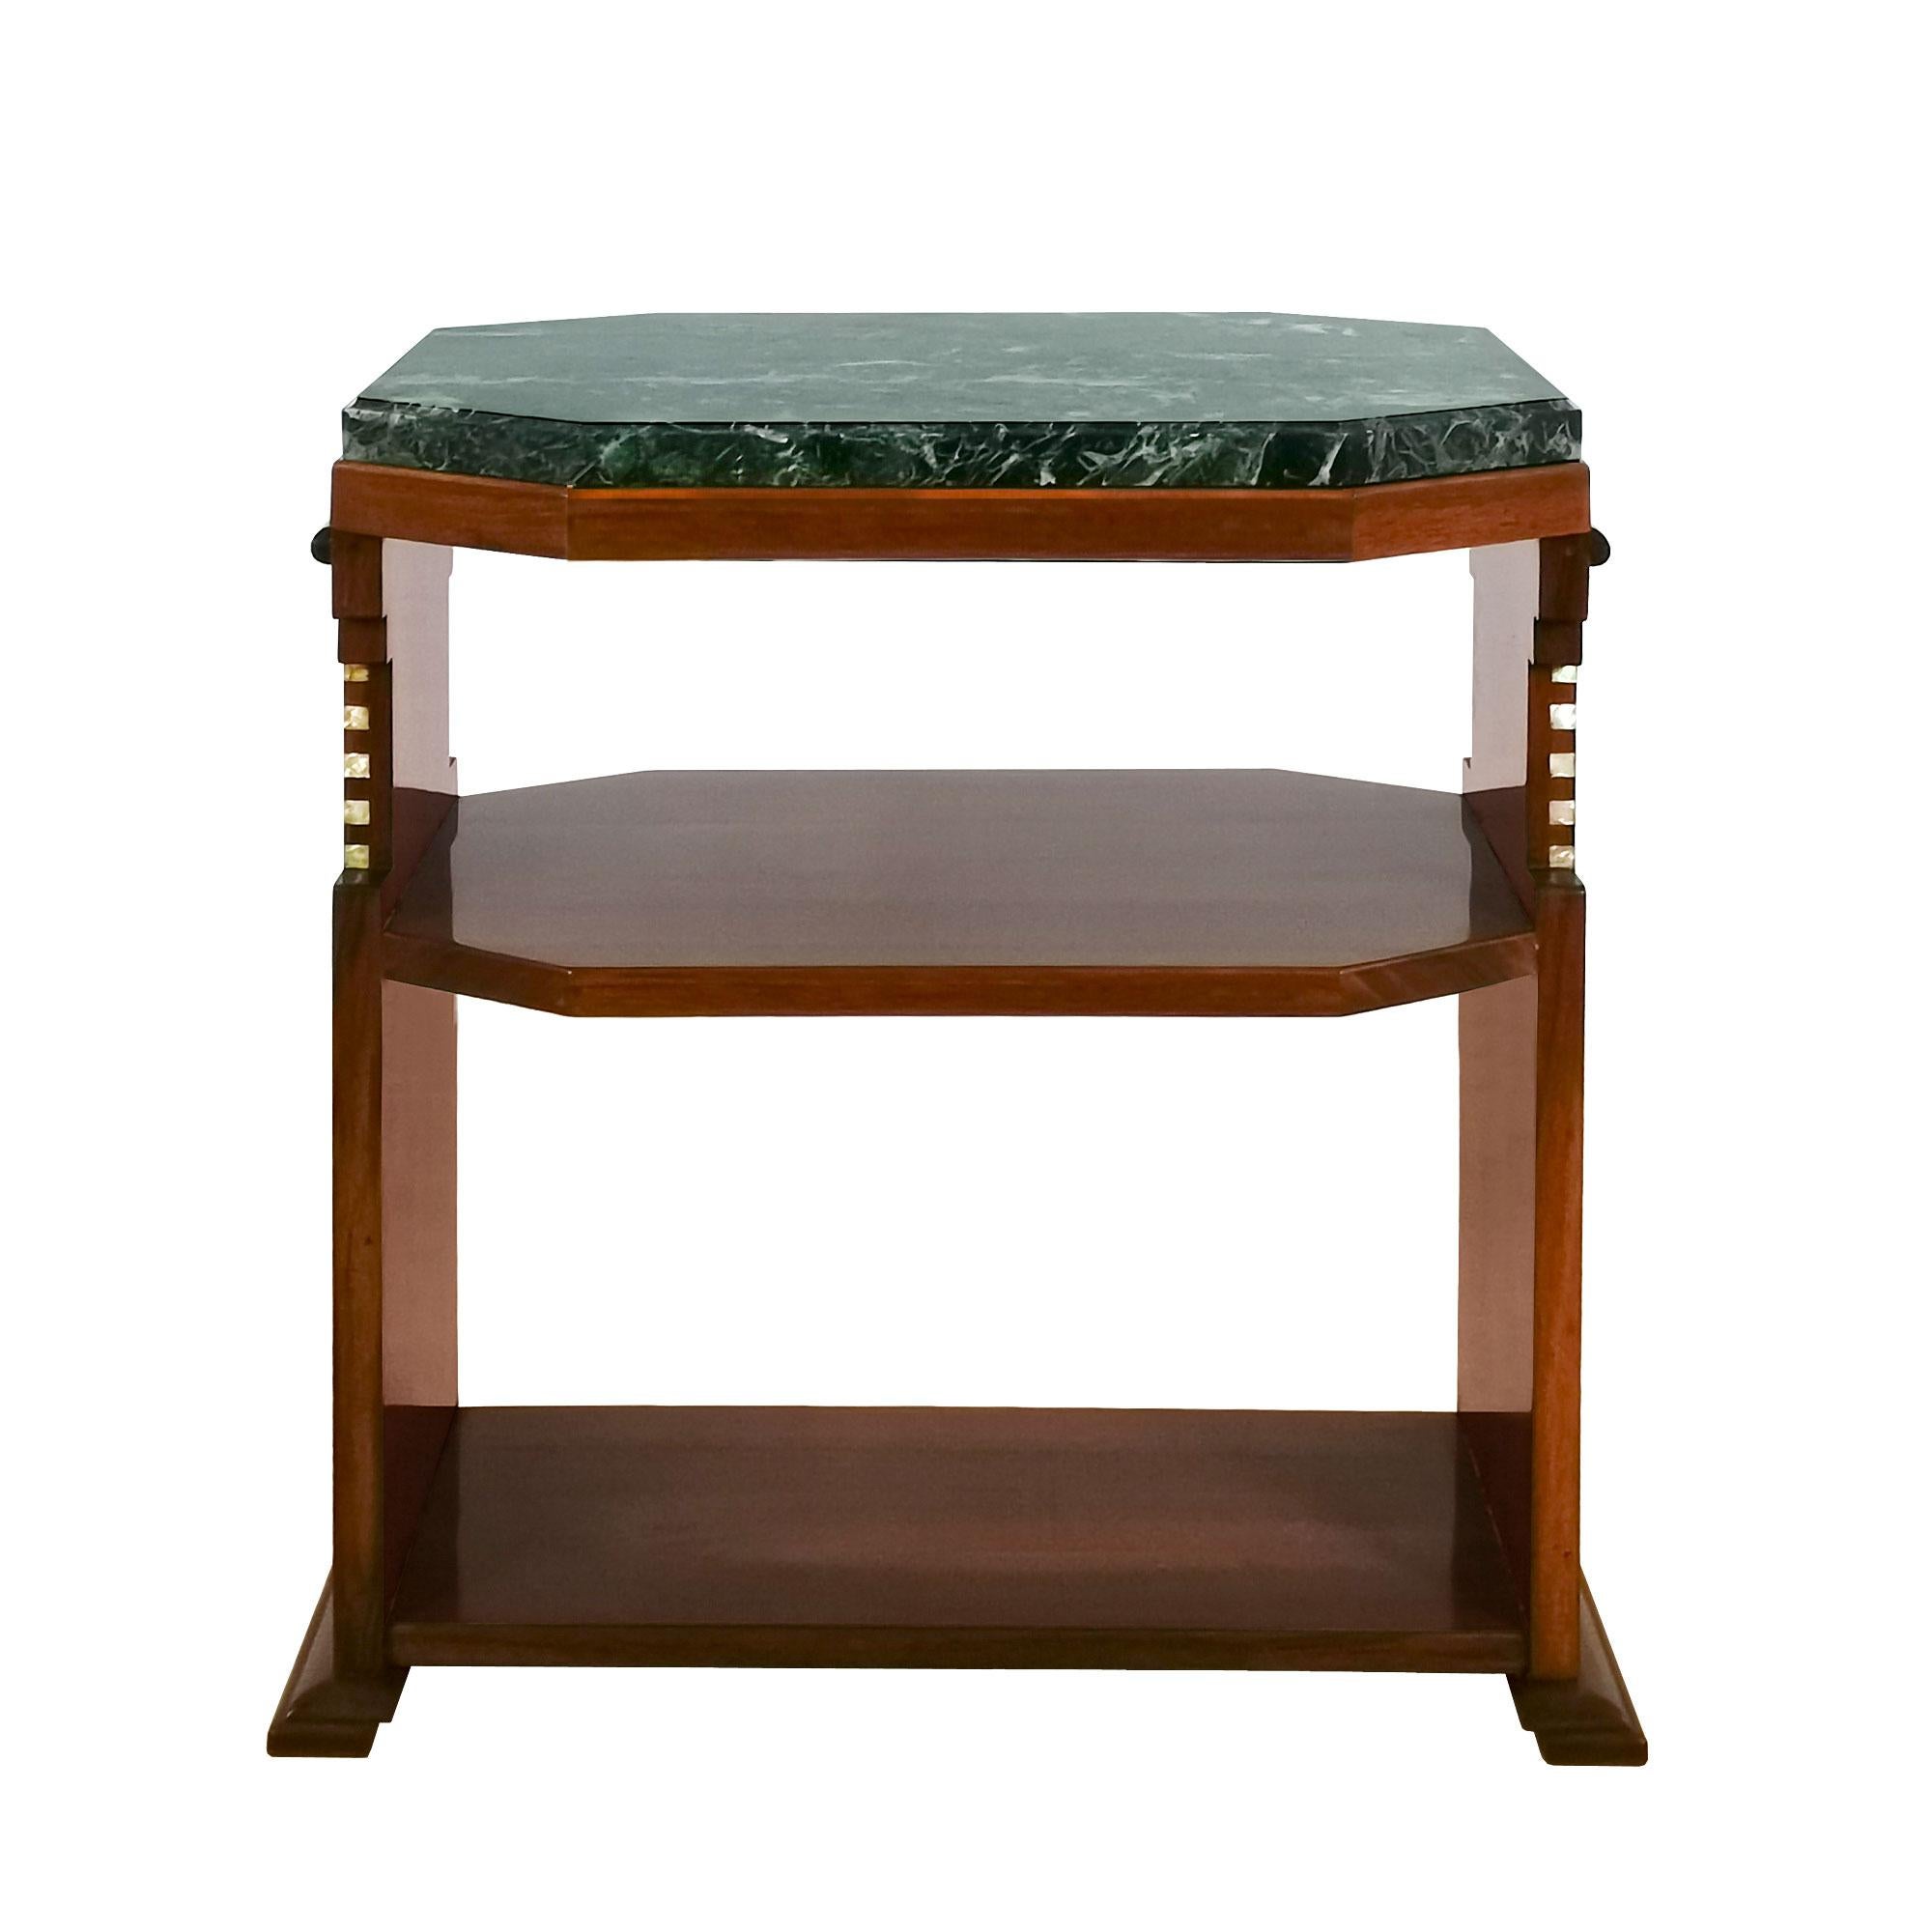 Cubist Art Deco side table, solid walnut and walnut veneer, ebony and false mother of pearl marquetry, French polish. Black, white and green beveled marble on top.

Belgium c. 1925.